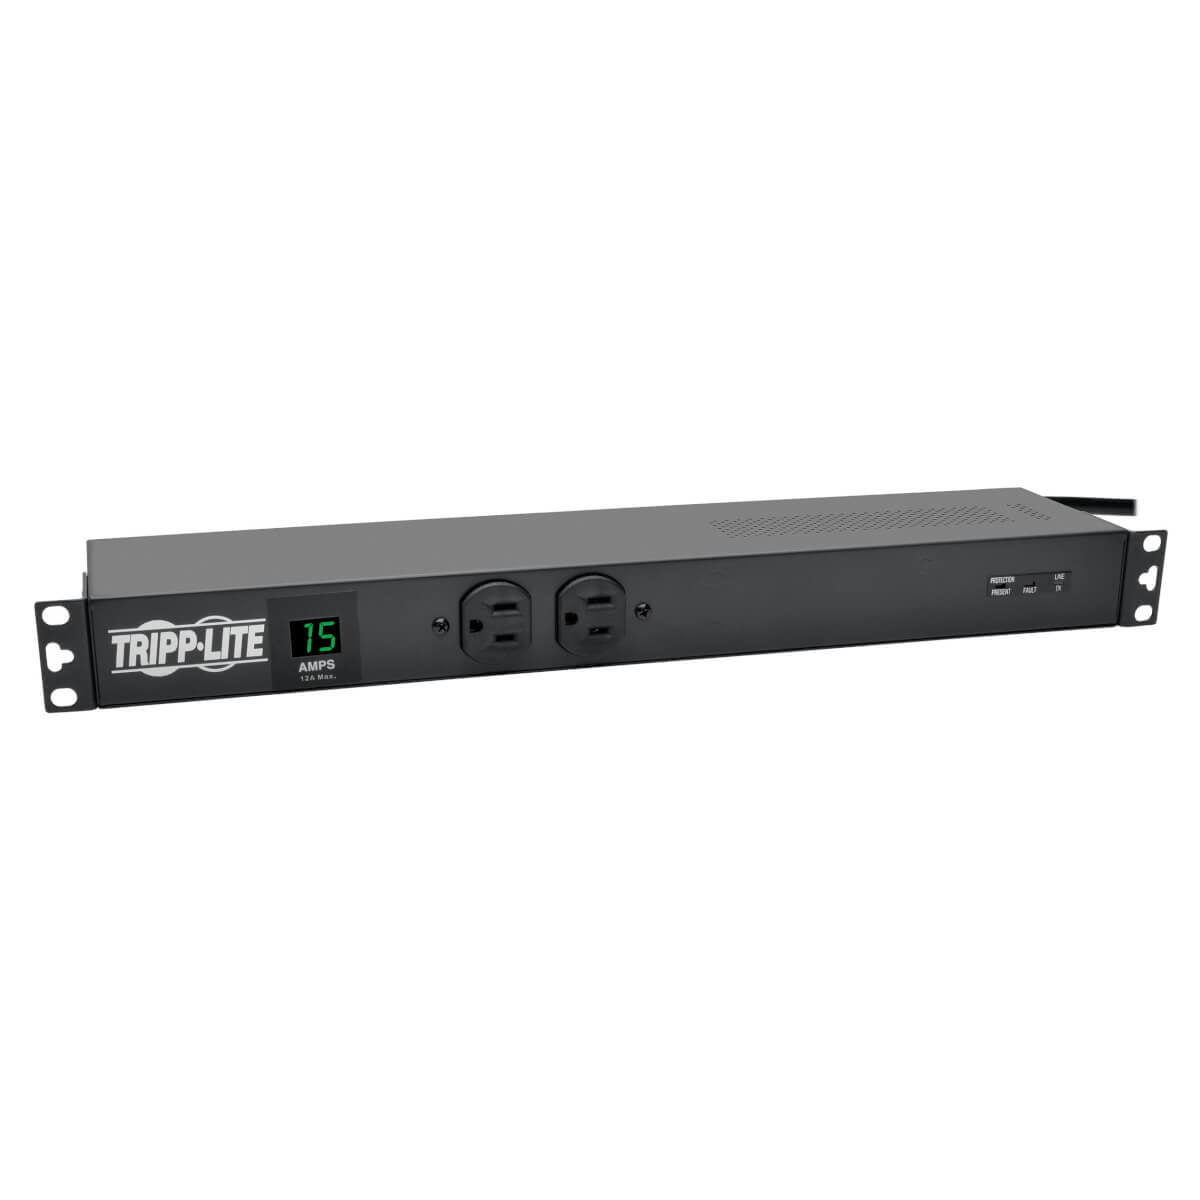 Tripp Lite 1.44Kw Single-Phase Metered Pdu + Isobar Surge Suppression, 3840 Joules, 120V Outlets (14 5-15R), 5-15P, 15Ft Cord, 1U Rack-Mount